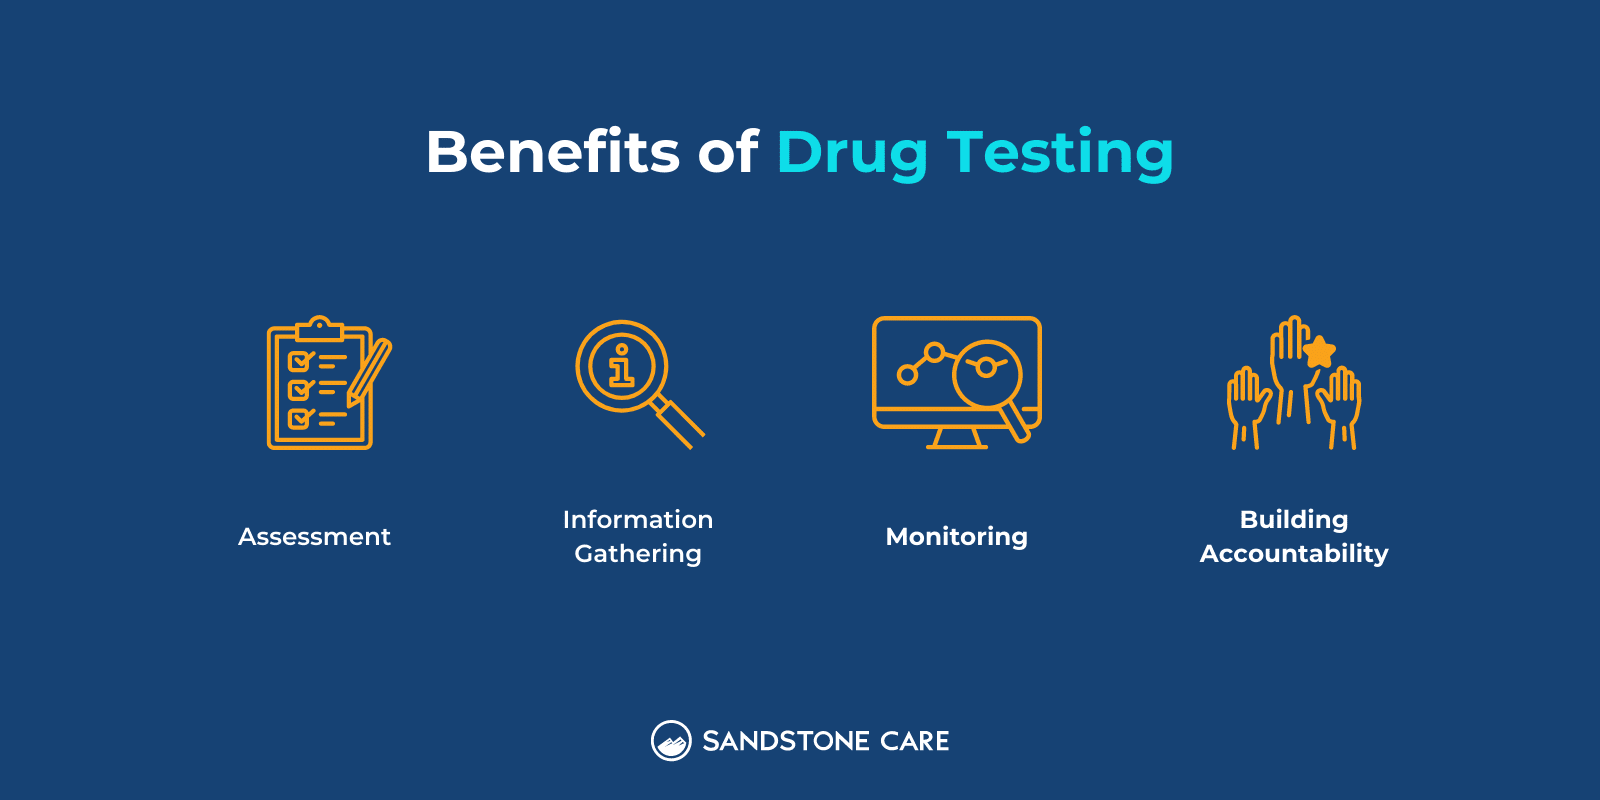 Benefits of drug testing infographic with relevant icons